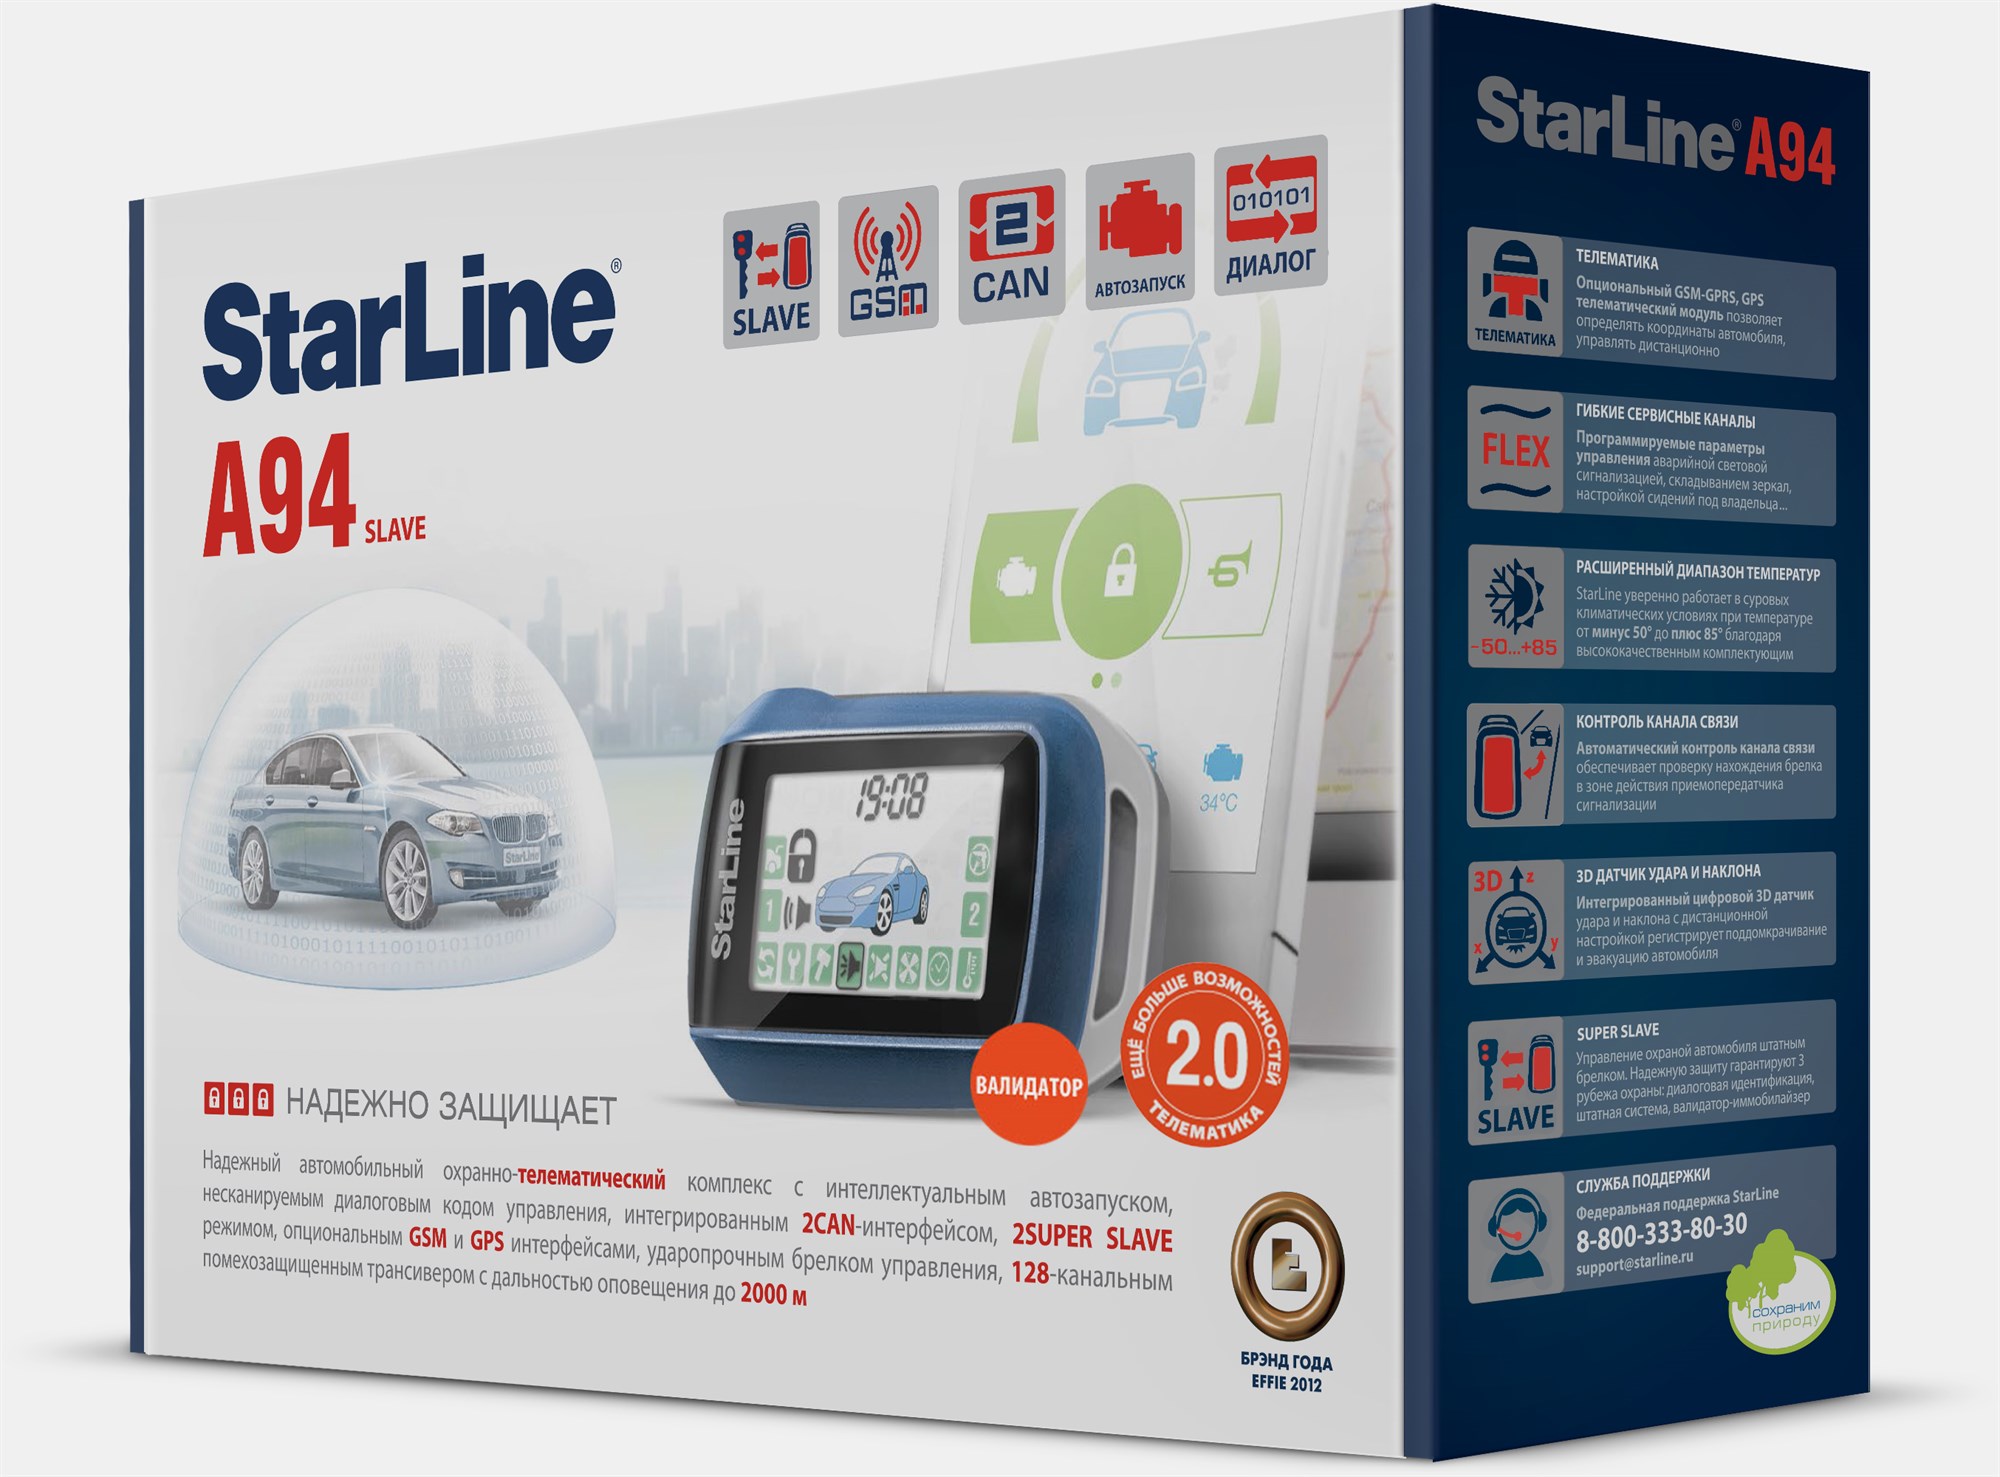  Starline a94 dialog 2Can